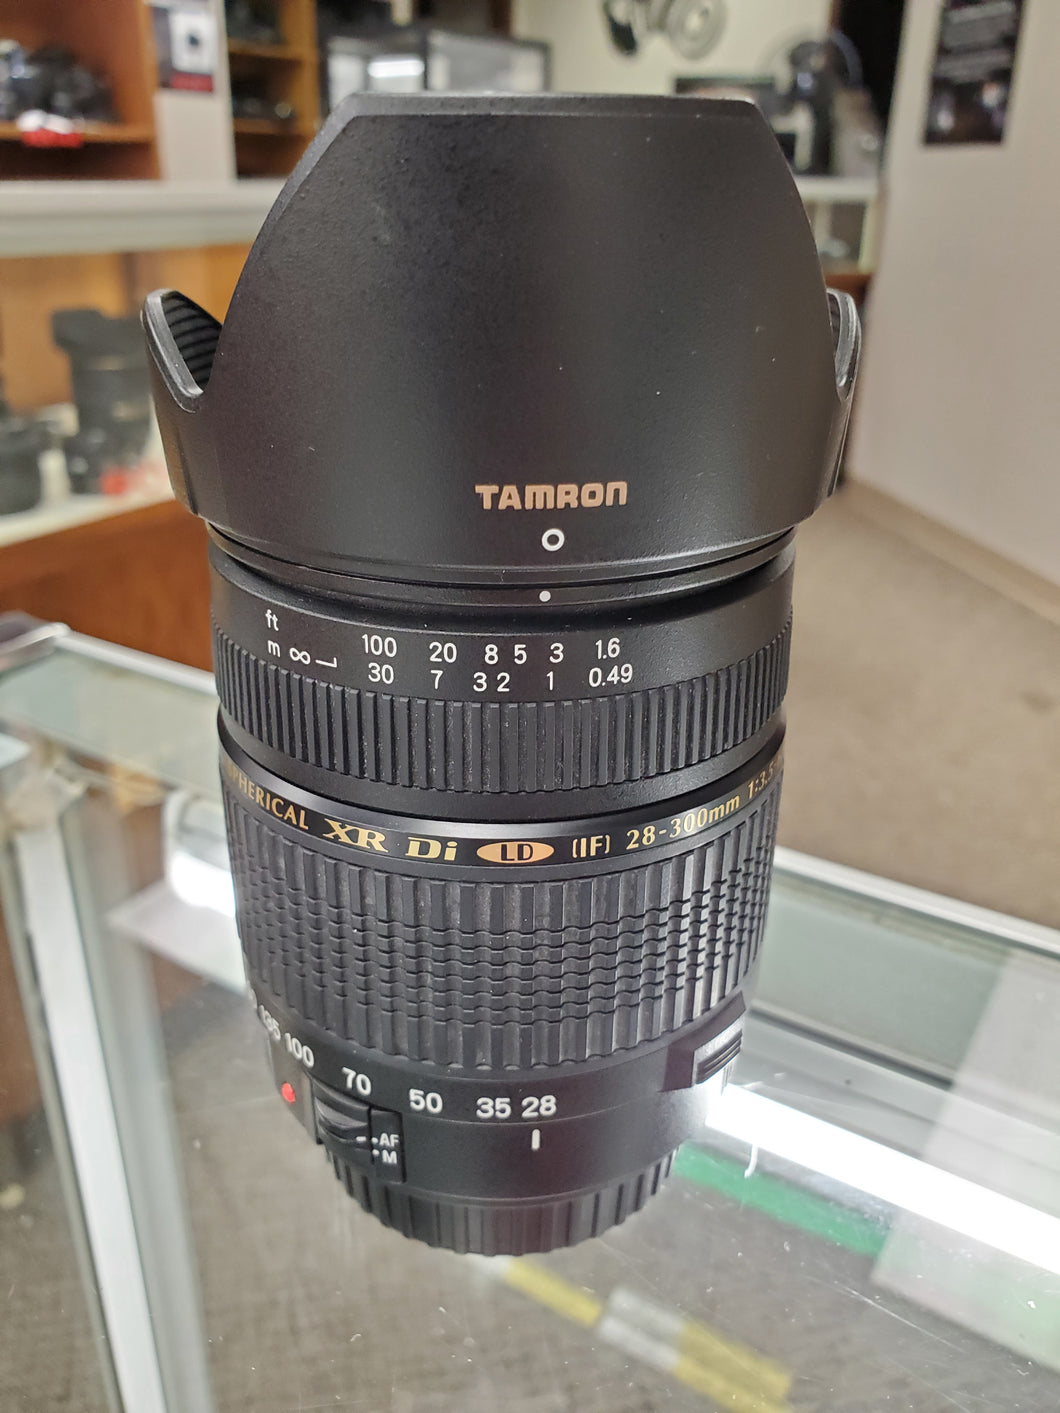 Tamron AF 28-300mm f/3.5-6.3 XR Di LD Aspherical (IF) Macro Lens for Canon - Like New Condition - Paramount Camera & Repair